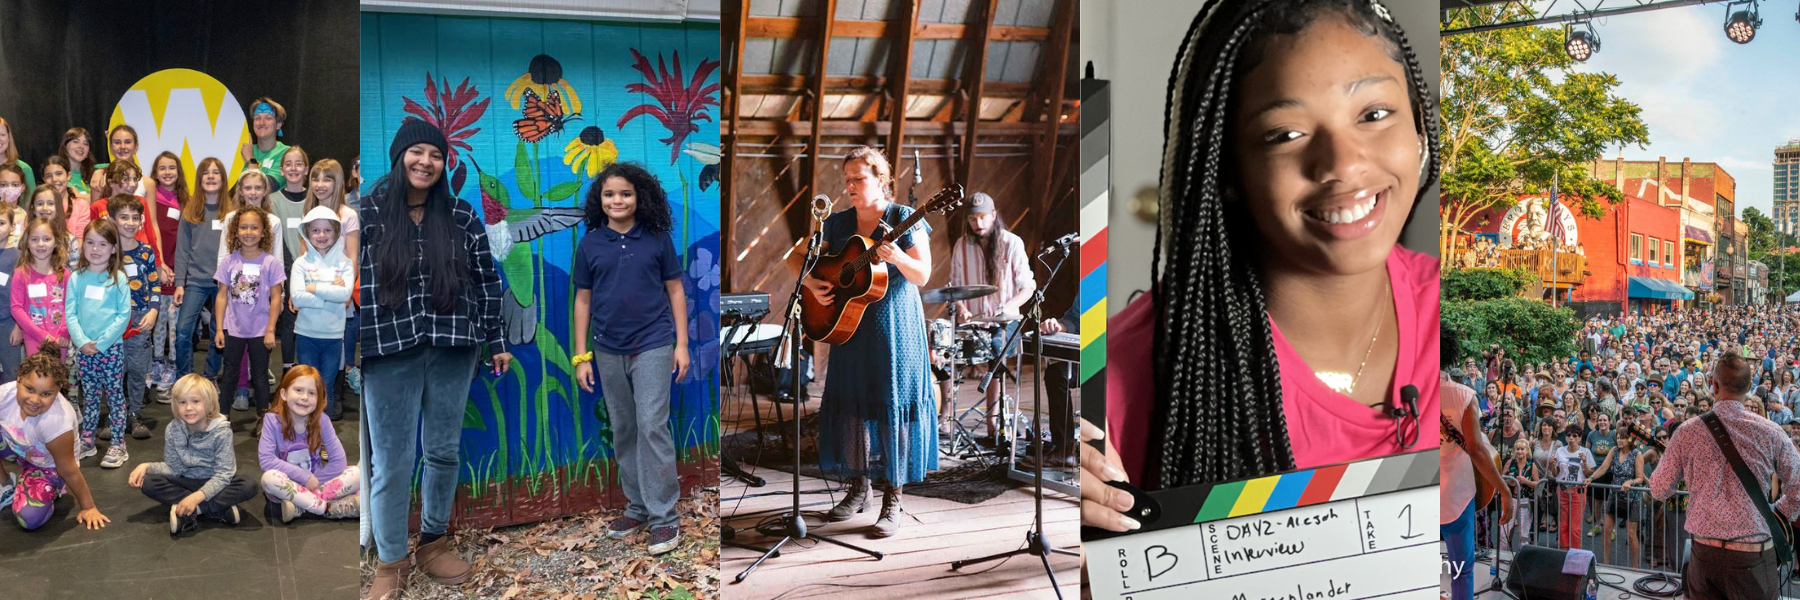 Select FY24 grant recipients from left to right: Wortham Center for the Performing Arts’ All for Kids program; Shiloh Community Association’s Pollinator mural; musician Hannah Kaminer’s new studio album, “Heavy on the Vine;” Umoja Health, Wellness and Justice Collective’s “Hope 4 the Future: Transforming Lives through Hip-Hop and Healing” documentary; and Asheville Downtown Association’s Downtown After 5 series. Photos courtesy of grant recipients.